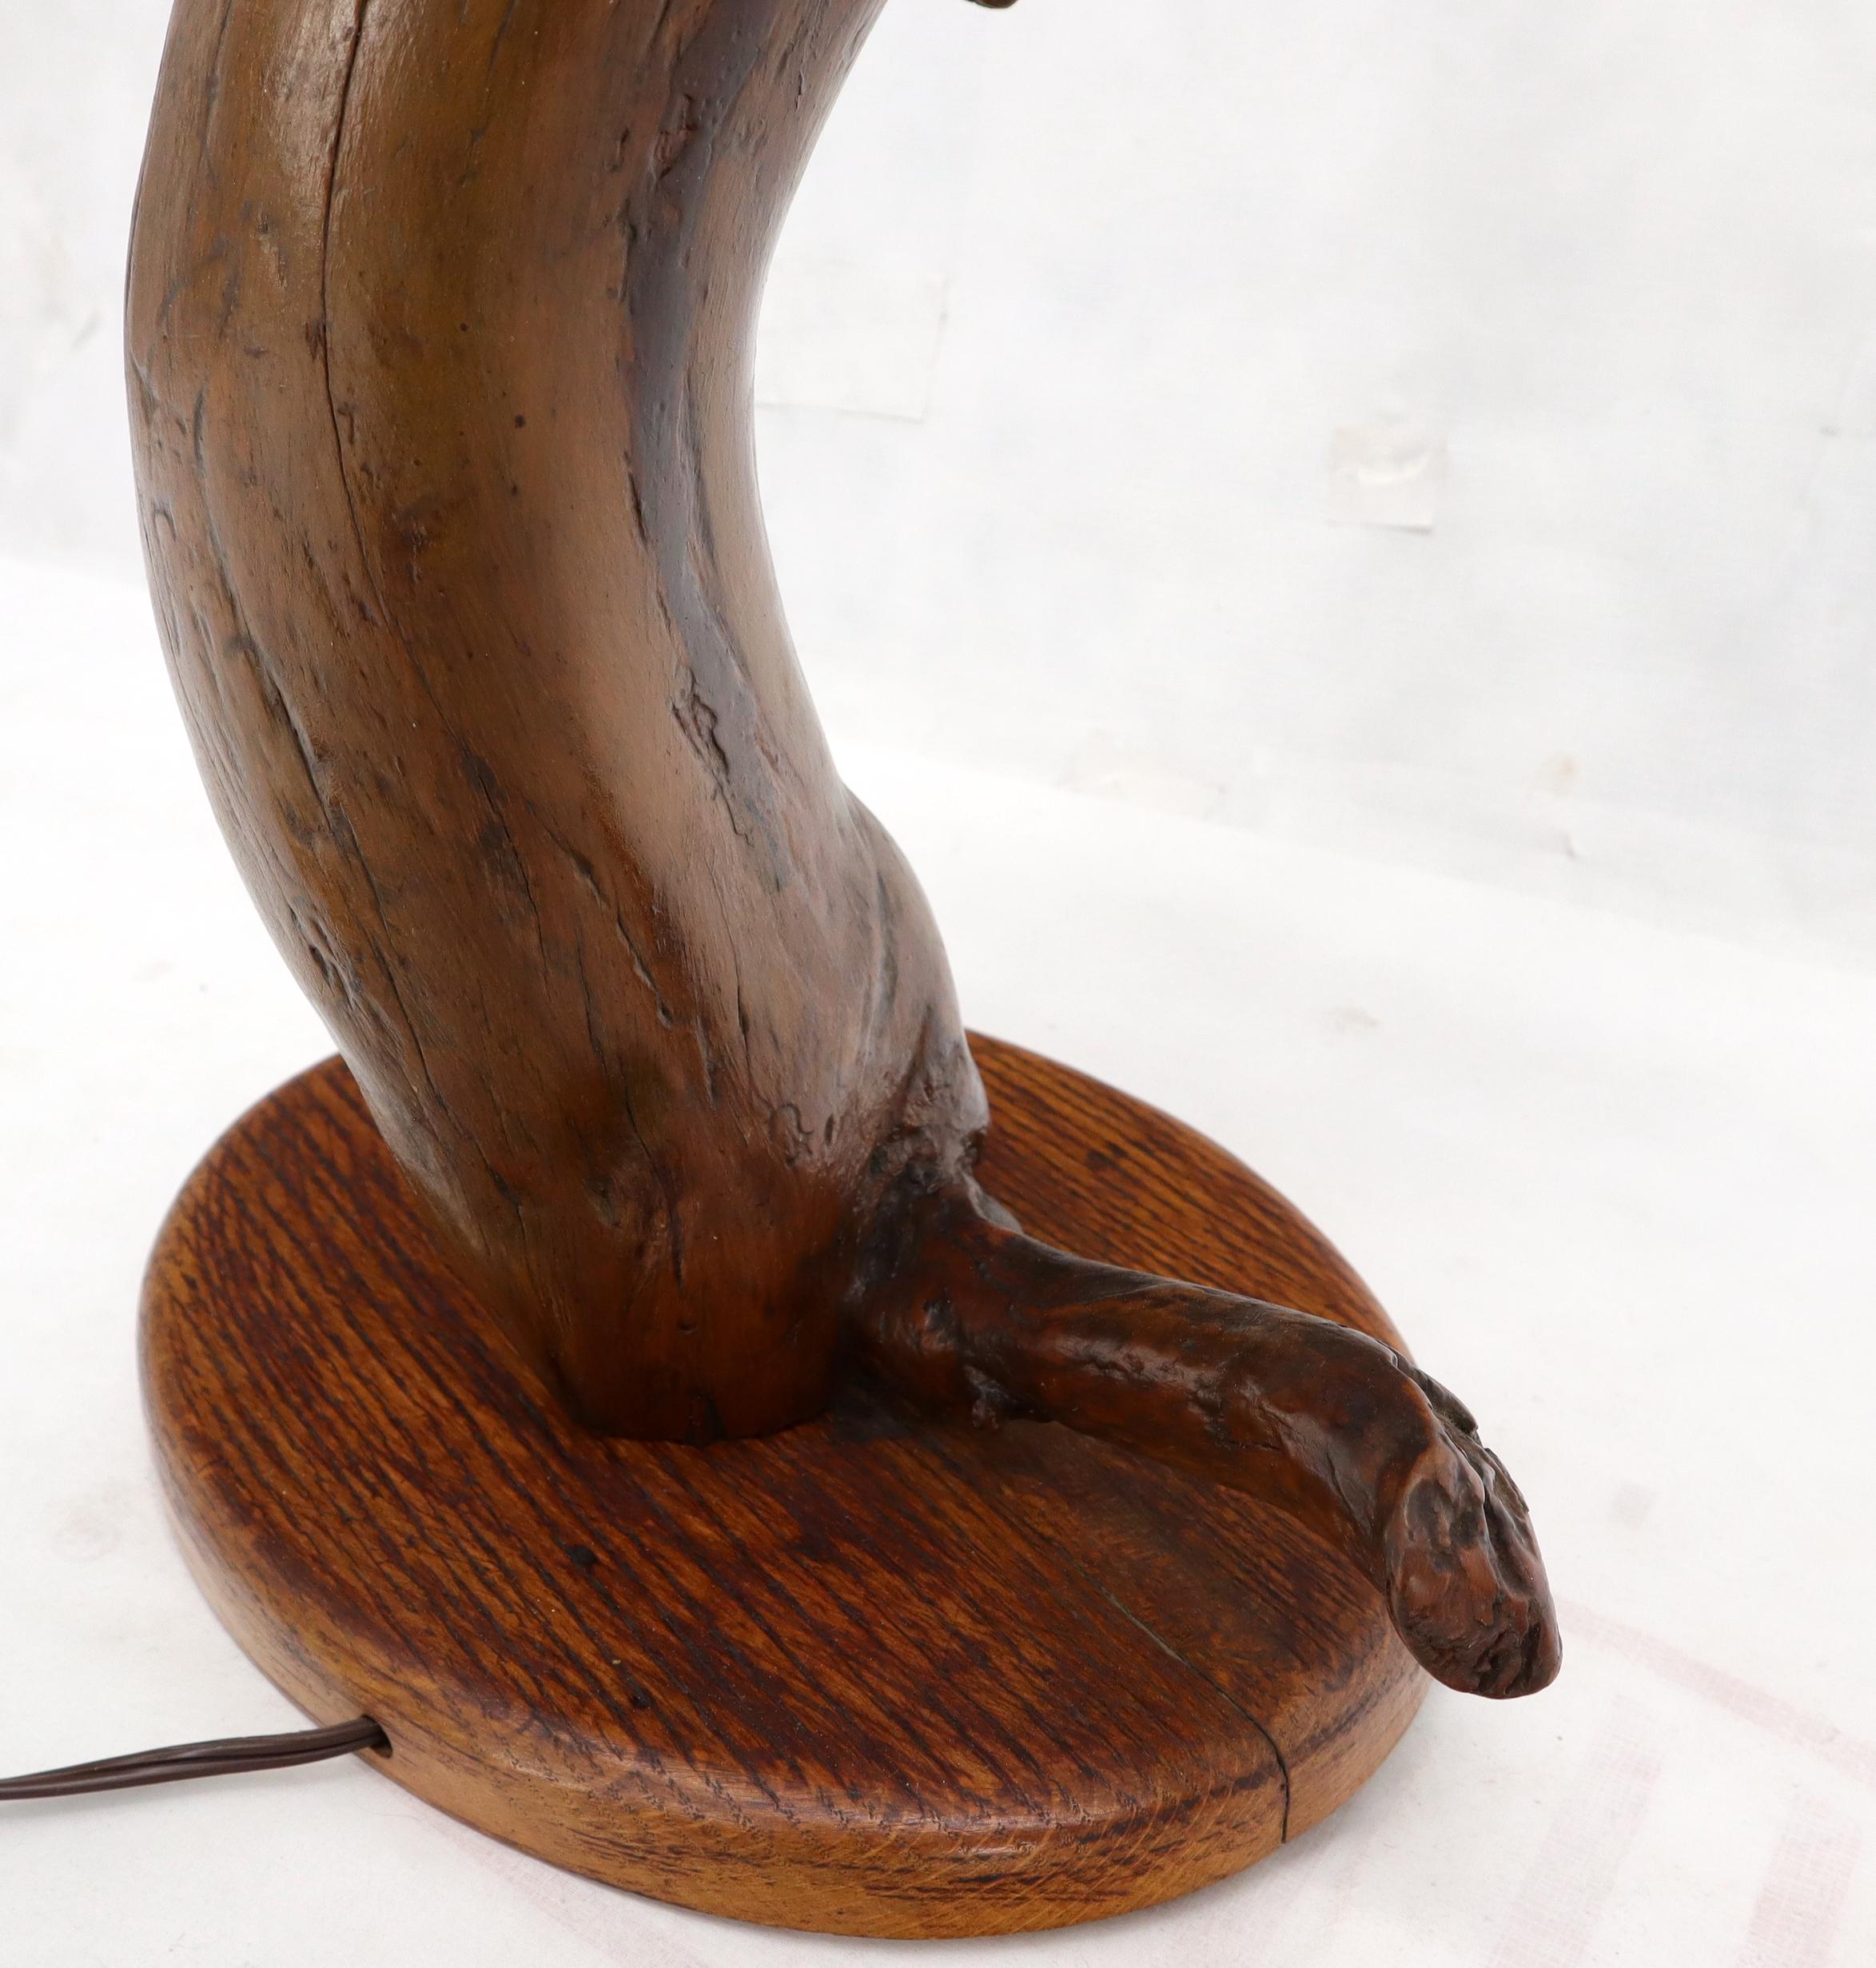 Varnished Arts & Crafts Driftwood Table Lamp In Excellent Condition For Sale In Rockaway, NJ